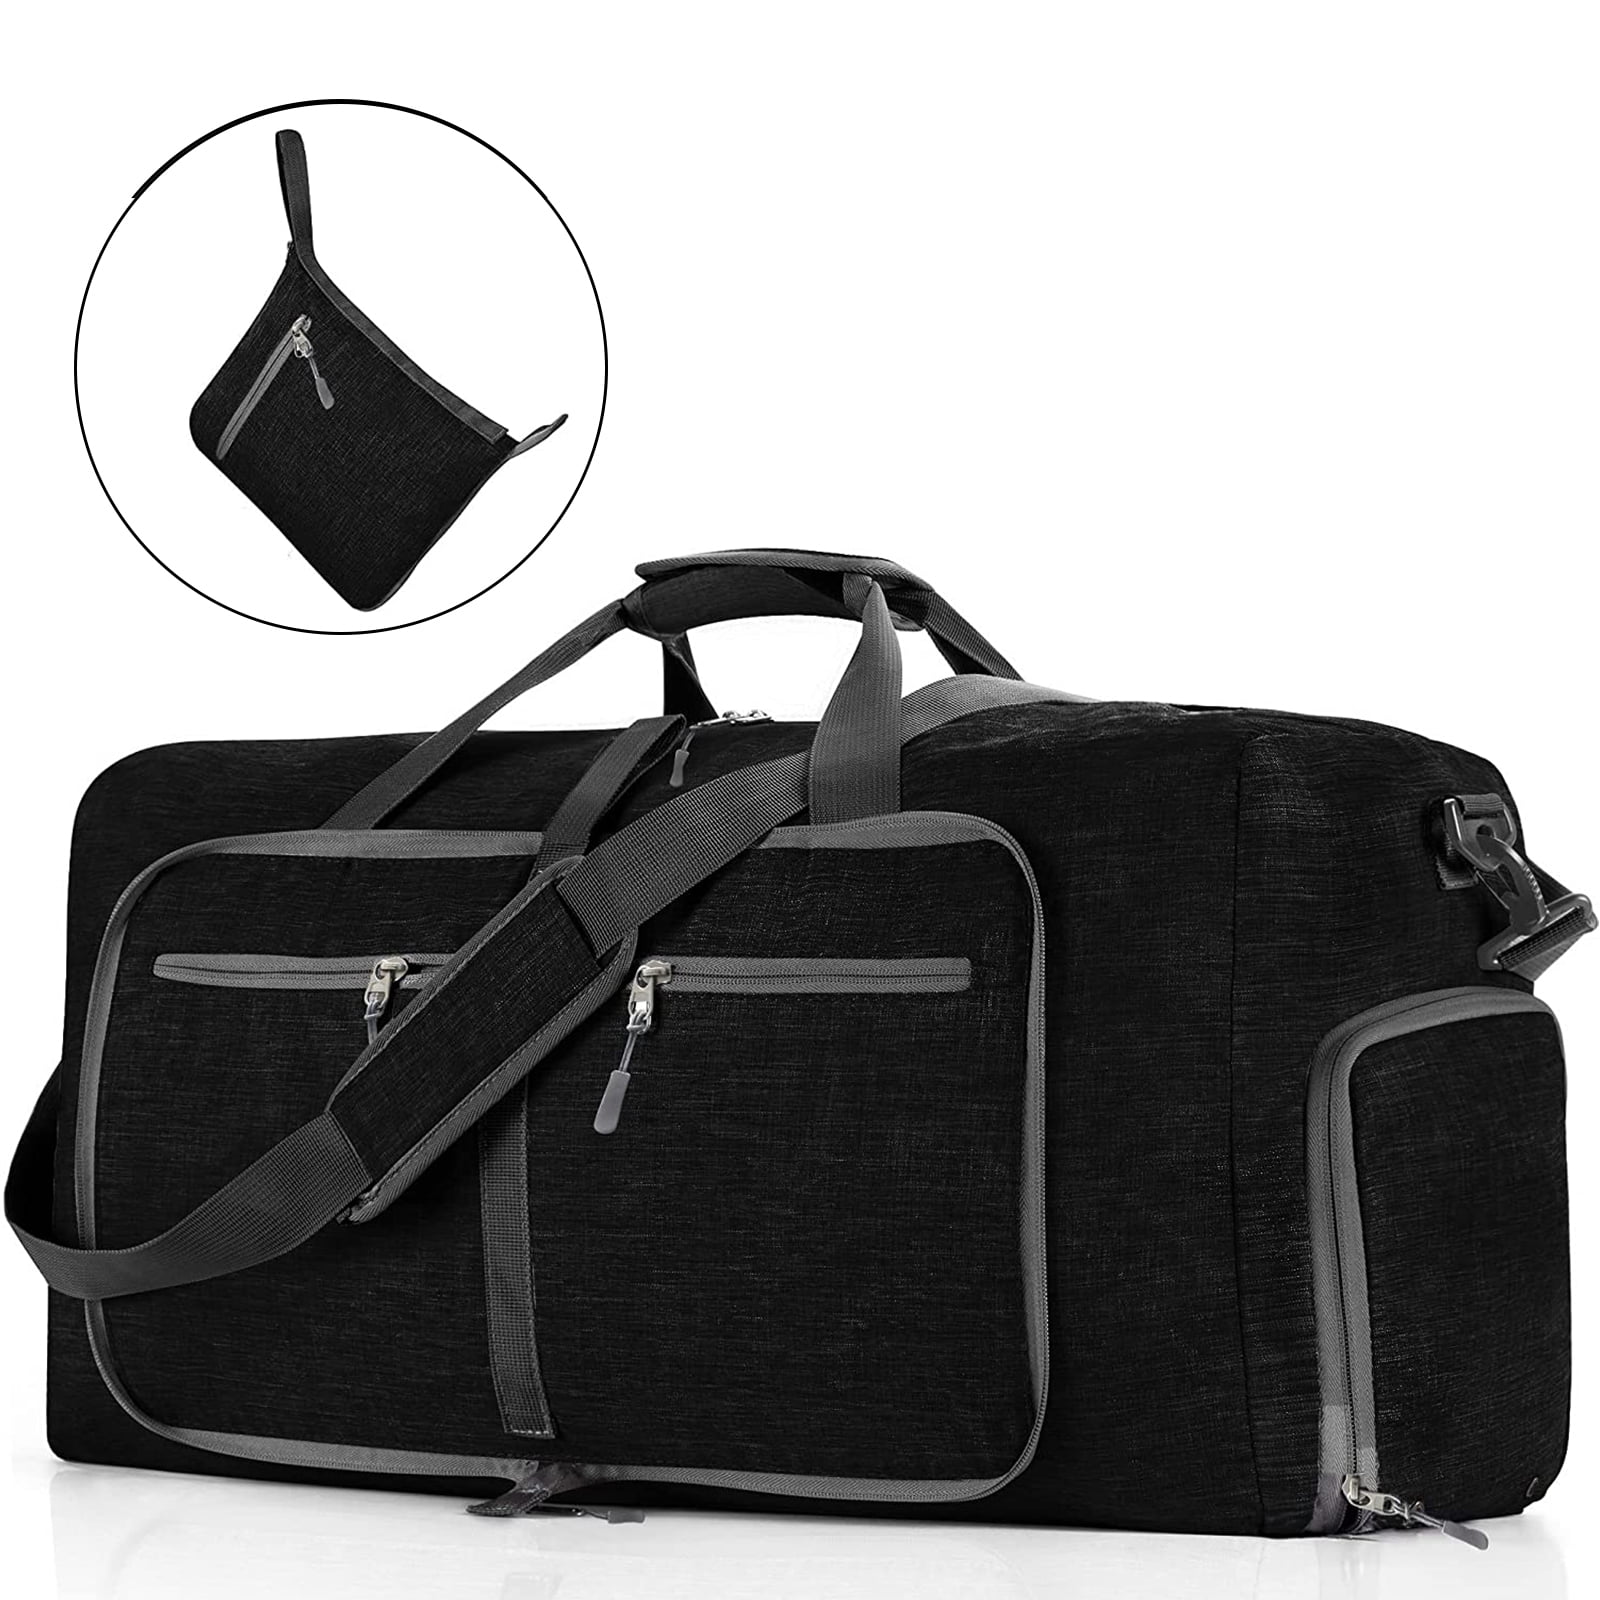 65L Large Foldable Travel Duffle Bag, Black Duffel Bag for Men Women,  Foldable Gym Bag with Shoes Compartment, Overnight Bags Waterproof & Tear  Resistant 